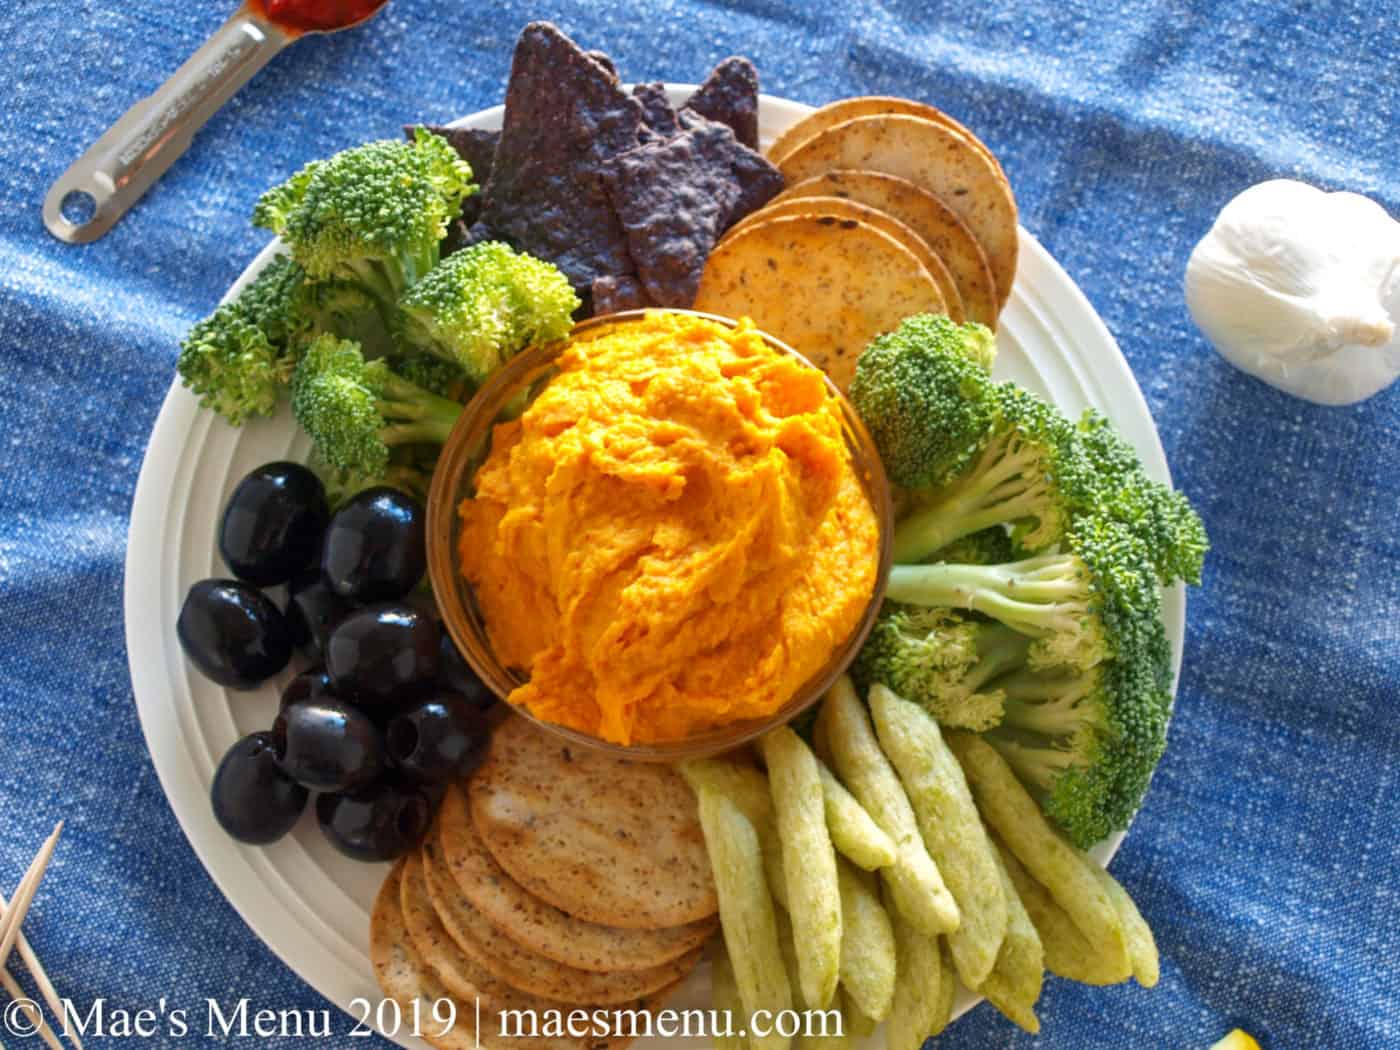 Sweet Potato Hummus with Harissa, veggies, and crackers on a white plate. Garlic clove, tooth picks, harissa, and lemons surround plate and sit on a blue dish towel.